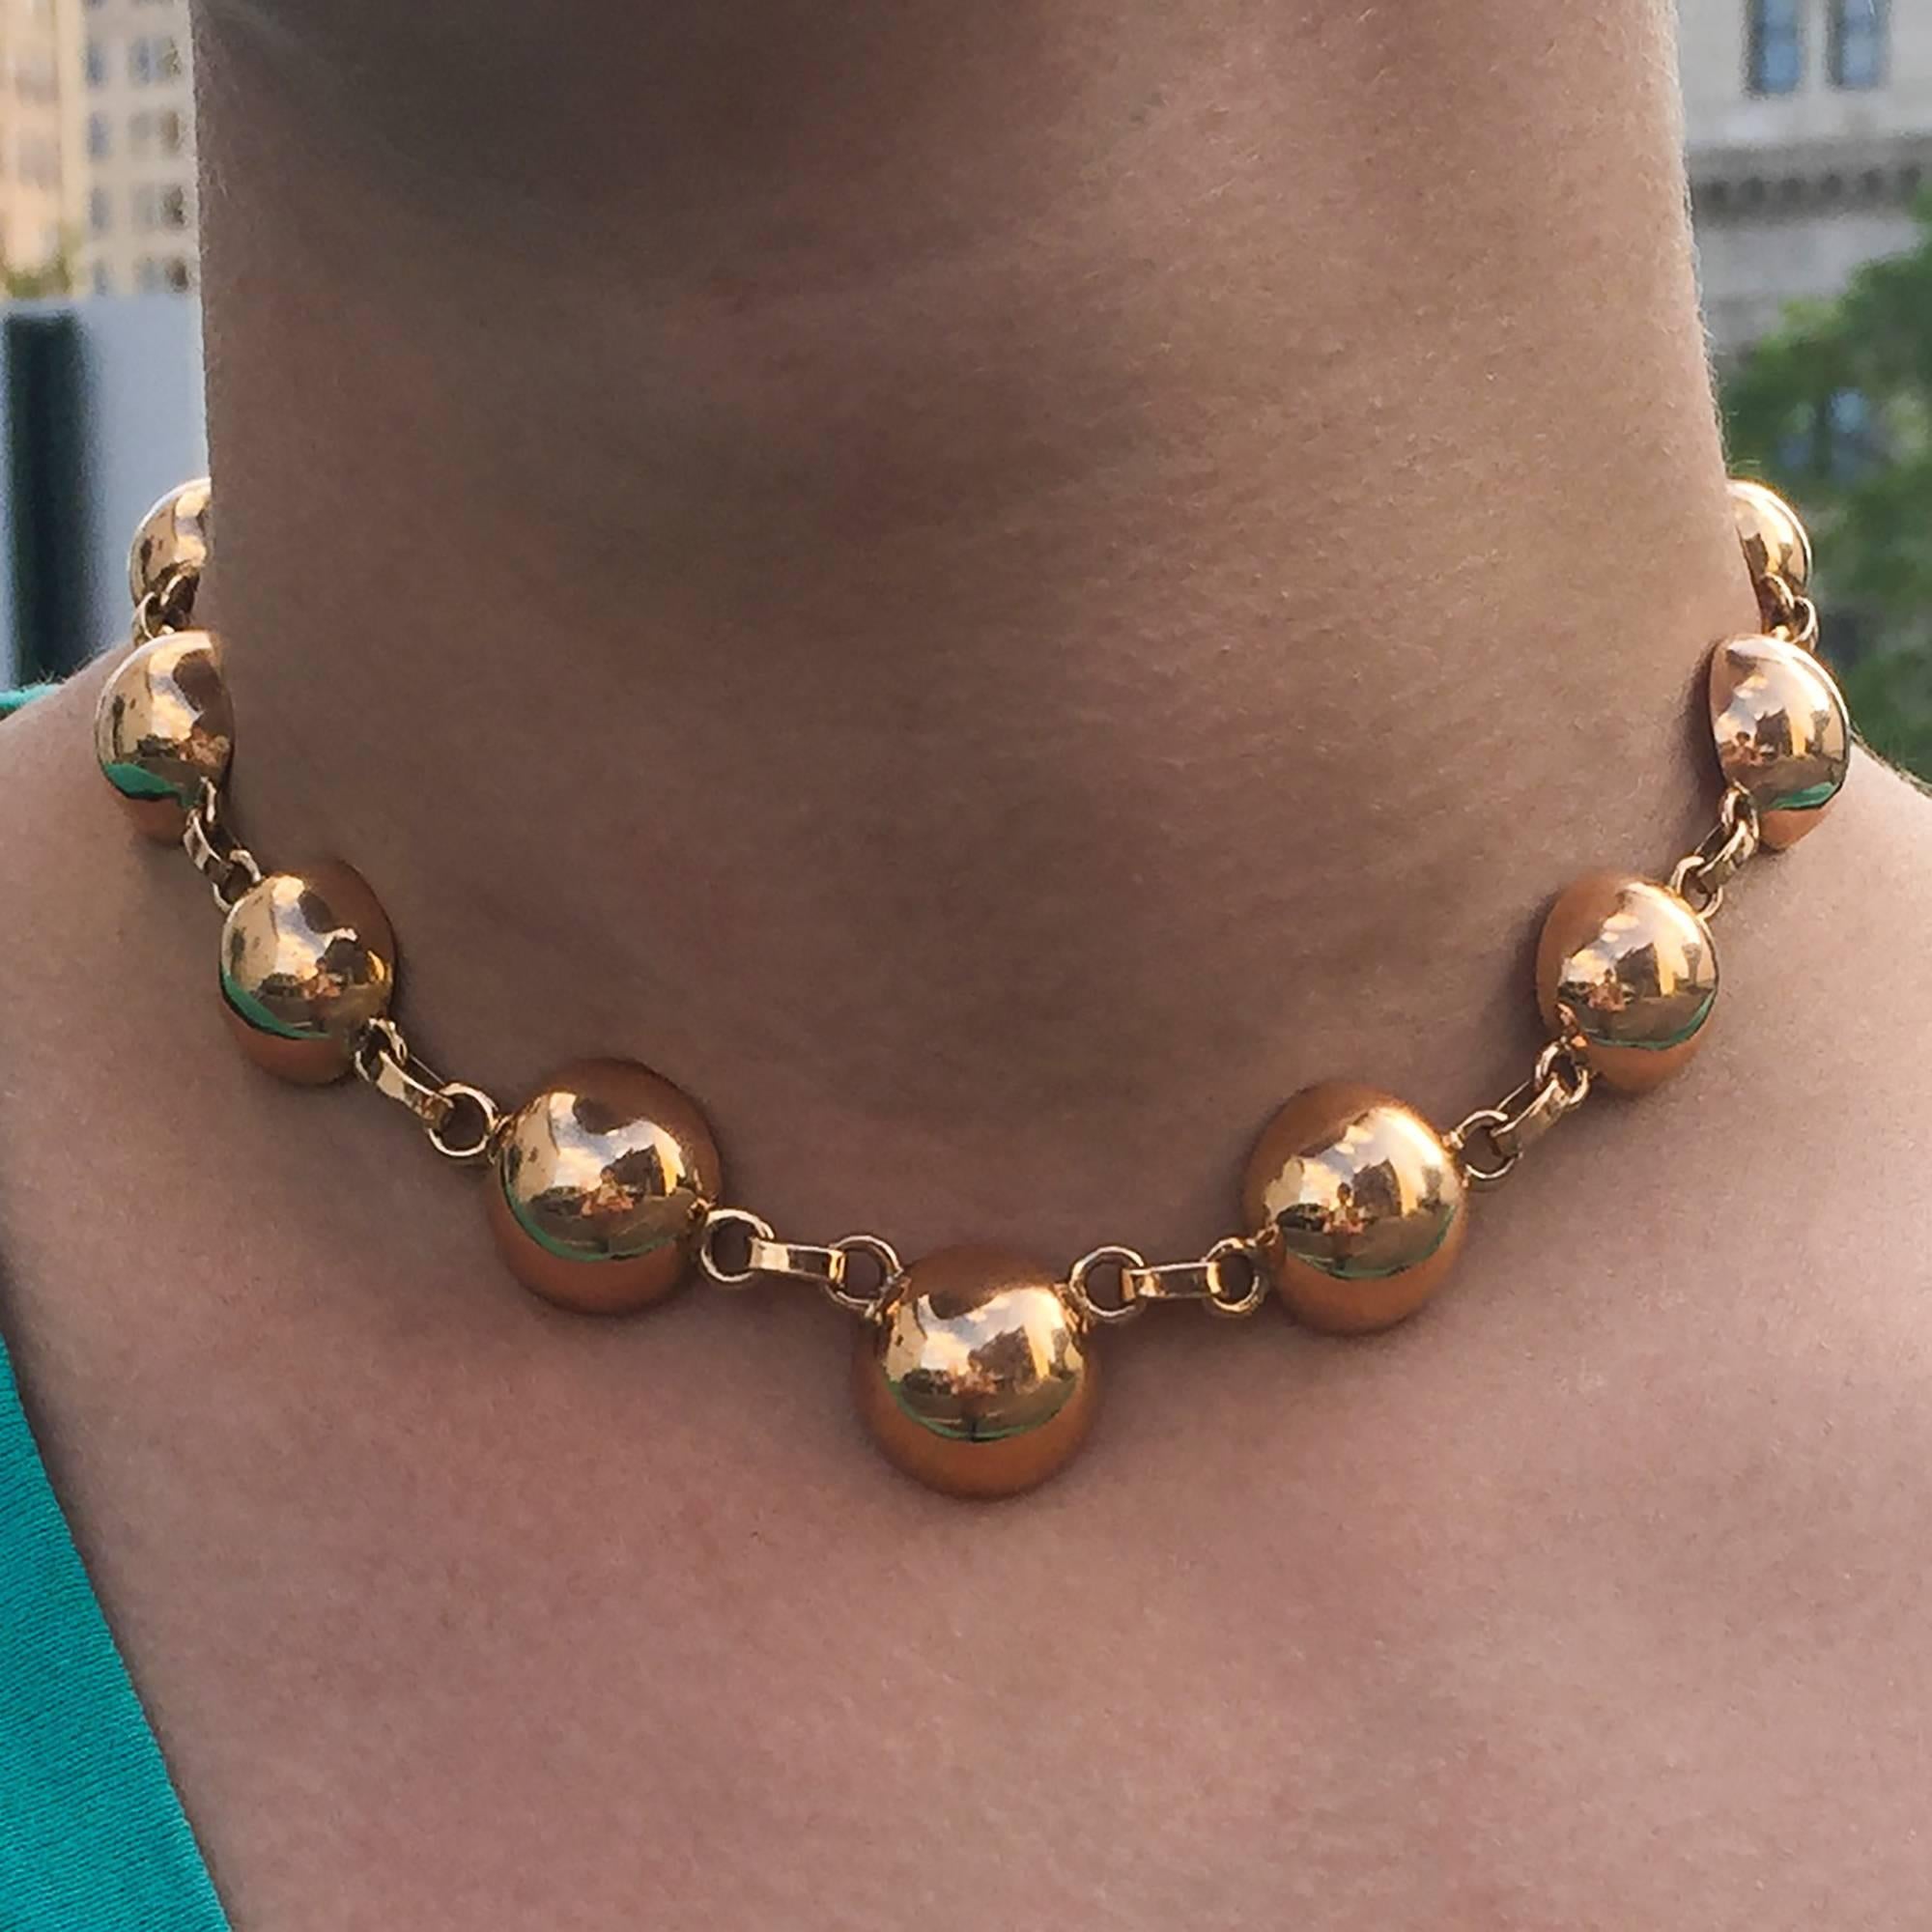 This beautiful Retro necklace necklace is made in 18k rose gold with a button-style design. The simple elegance is appropriate for casual or formal wear and it's design is classic enough to stand out in a crowd. It weighs 45.9 grams and is currently